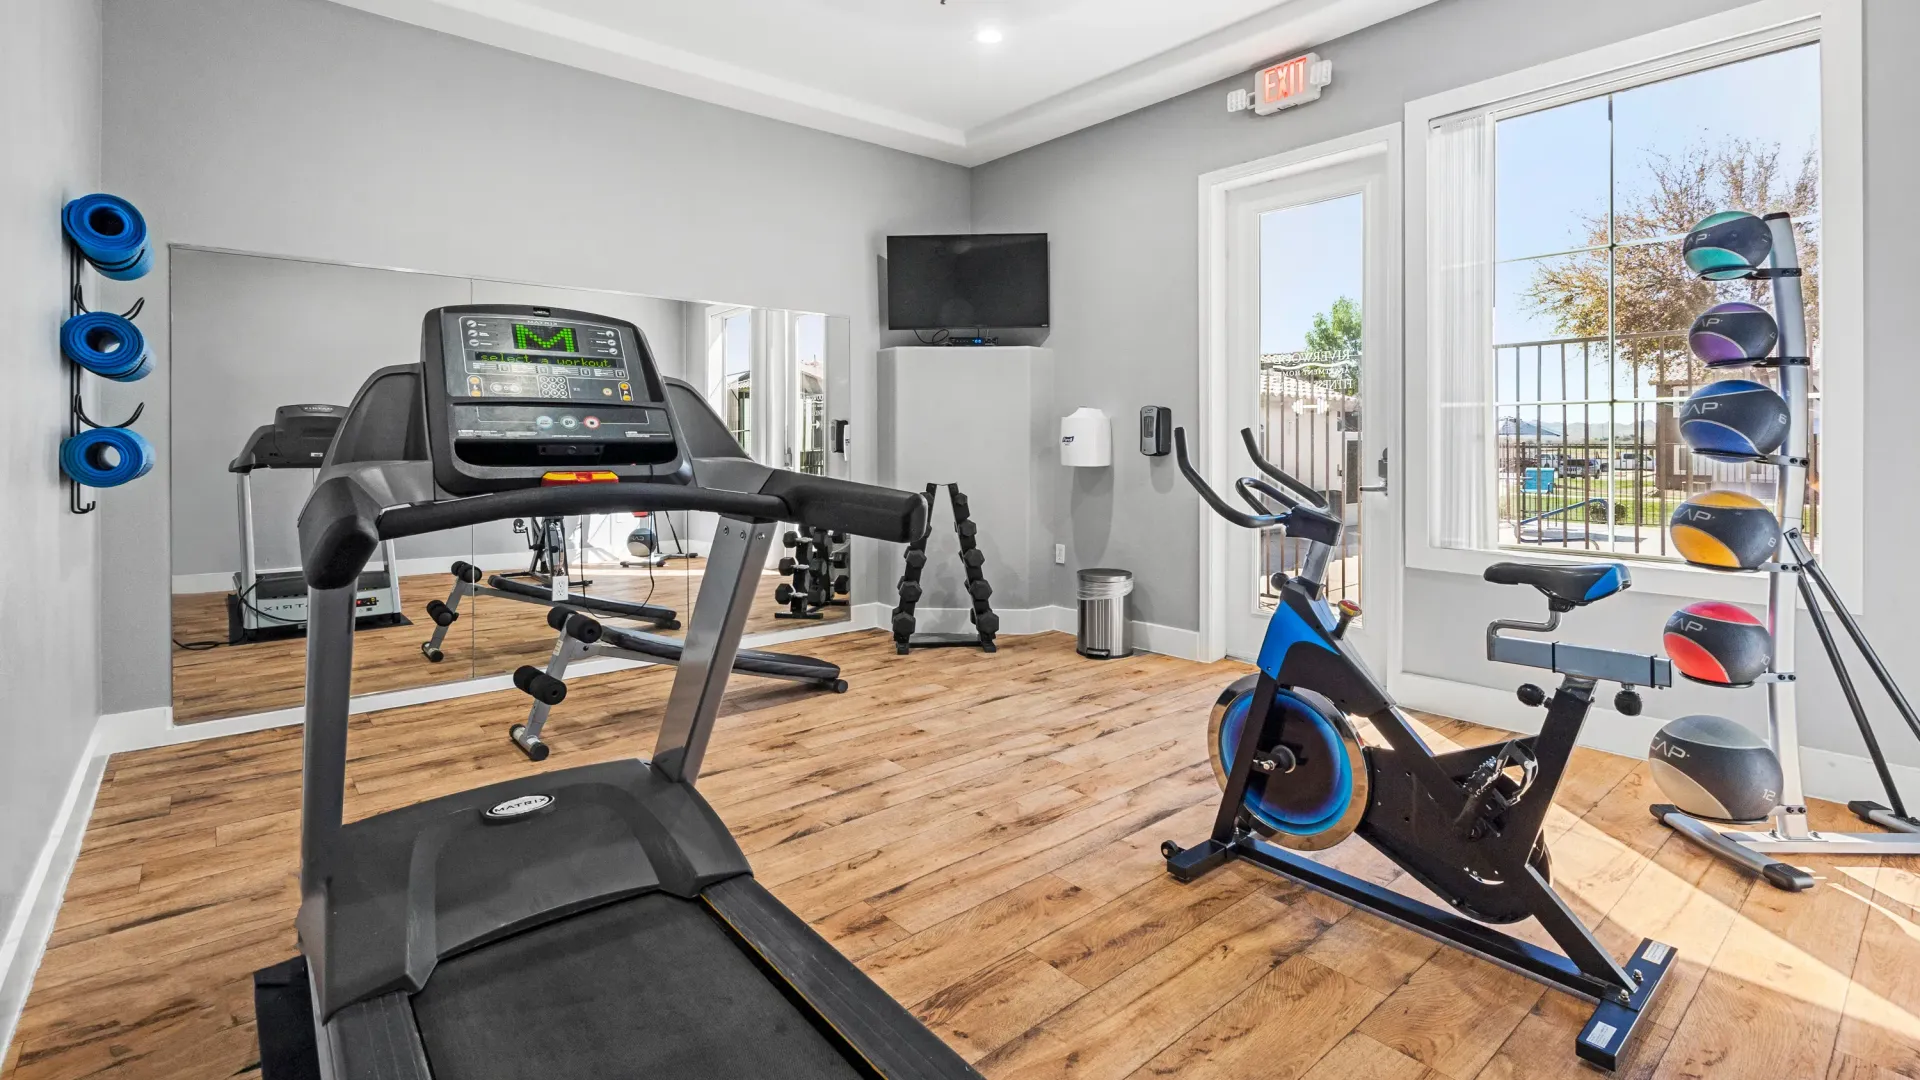 The fitness center boasts a colossal exercise mirror and top-tier equipment